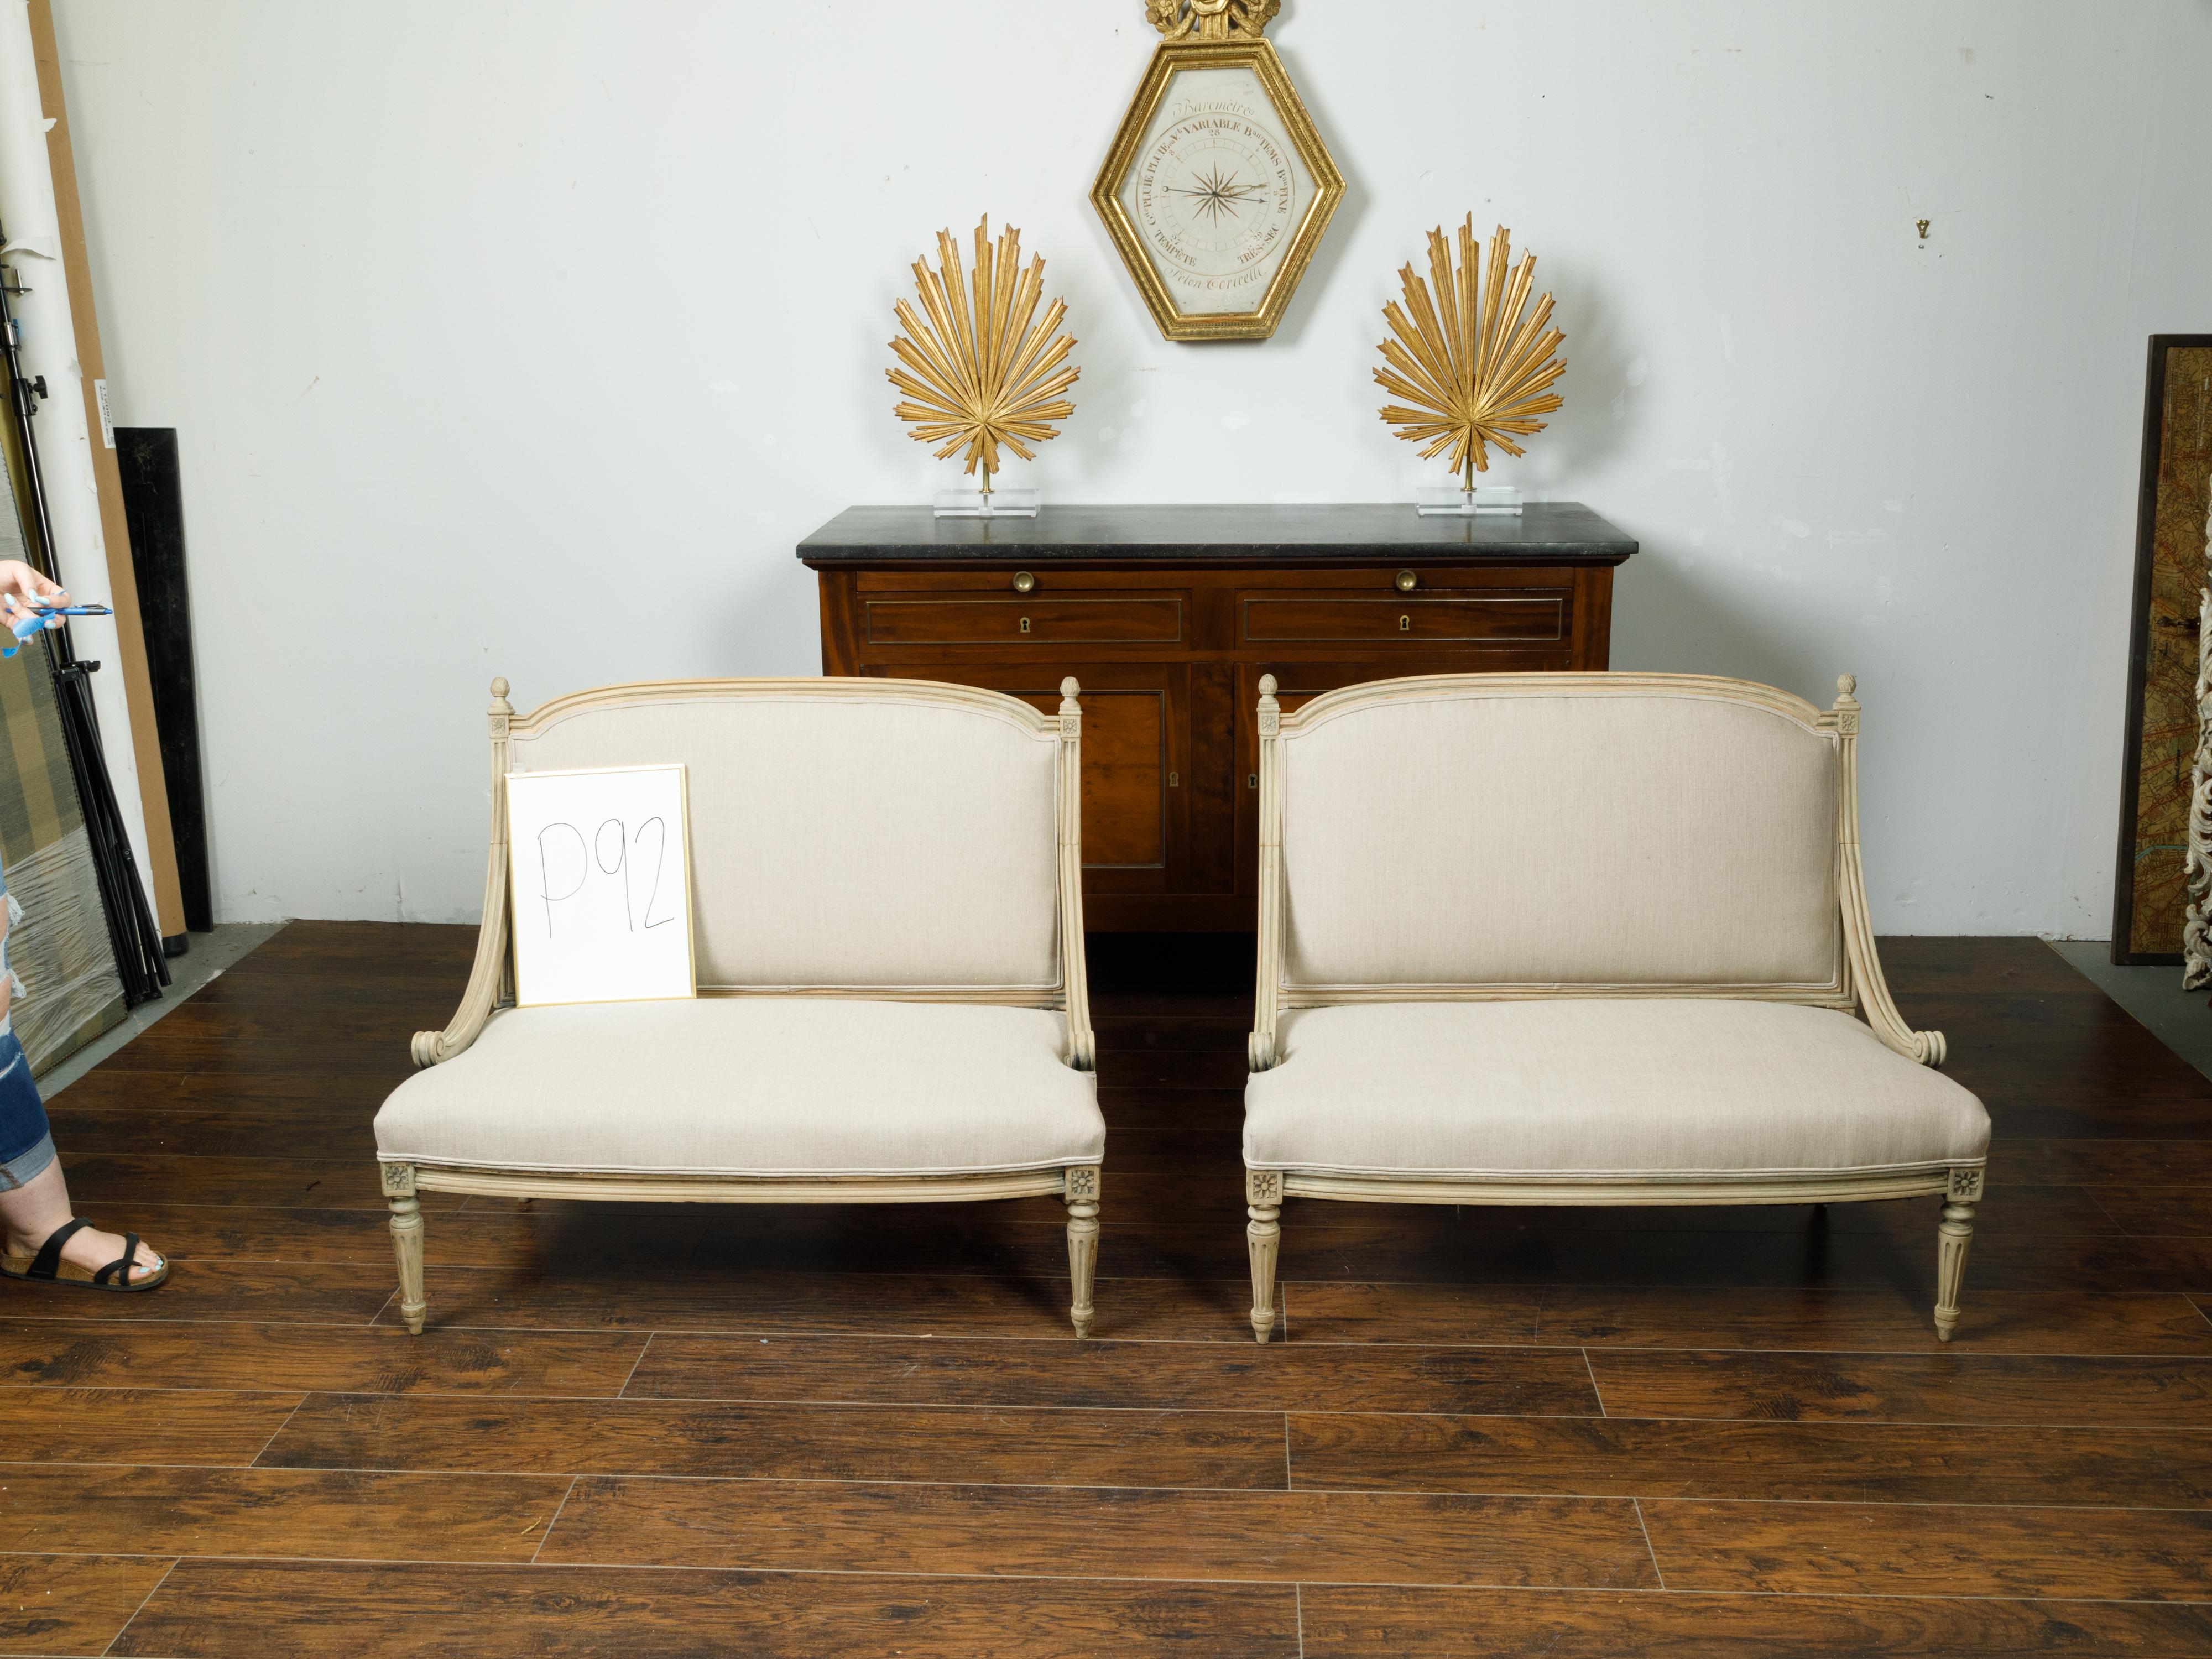 A pair of French Louis XVI style walnut settees from the early 20th century, with scrolling arm supports, fluted legs and new upholstery. Created in France during the early years of the 20th century, each of this pair of settees features a slightly